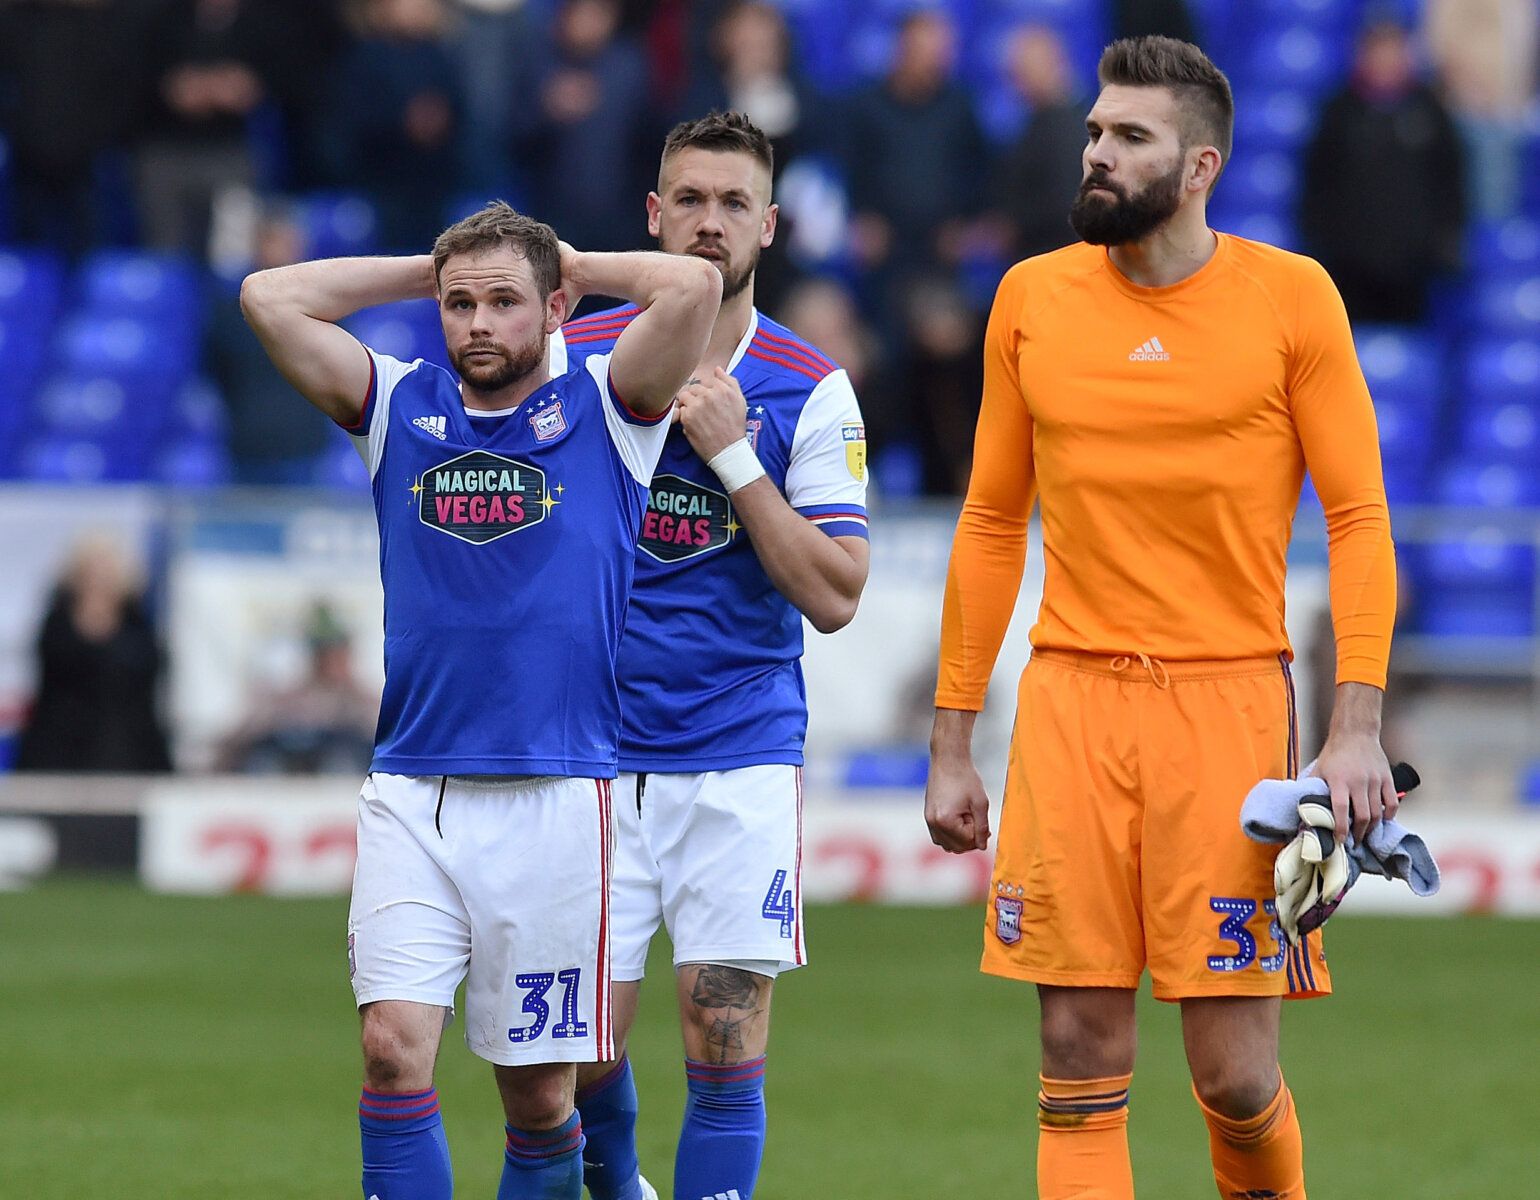 Soccer Football - Championship - Ipswich Town v Birmingham City - Portman Road, Ipswich, Britain - April 13, 2019   Ipswich Town's Alan Judge, Luke Chambers and Bartosz Bialkowski look dejected at the end of the match as they are relegated to League One   Action Images/Alan Walter    EDITORIAL USE ONLY. No use with unauthorized audio, video, data, fixture lists, club/league logos or 